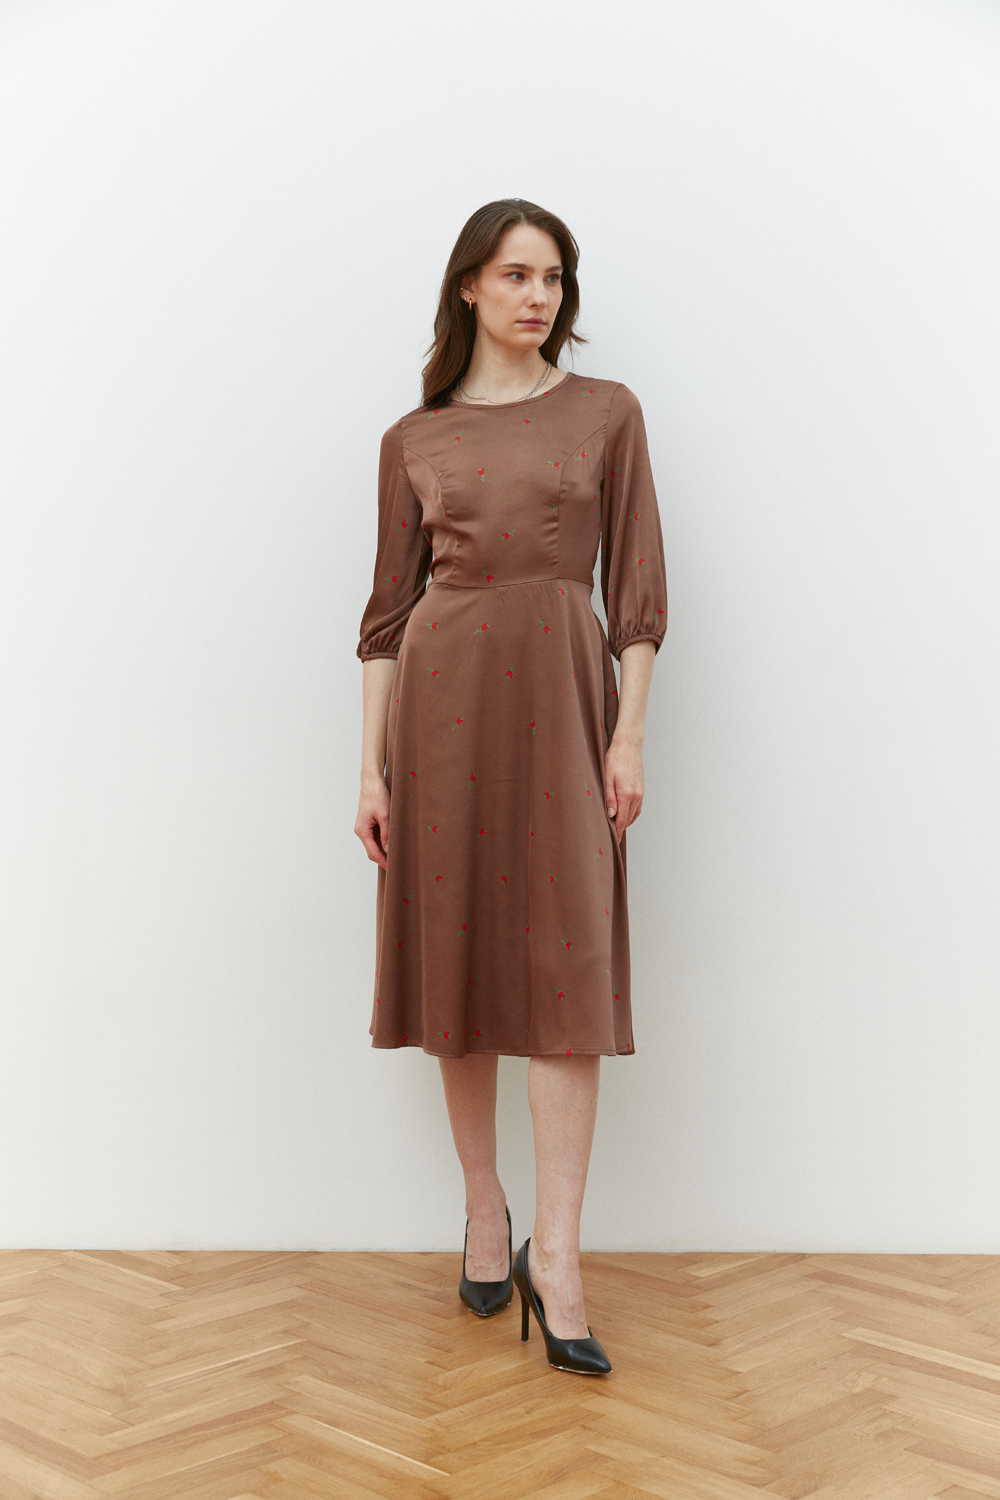 Semi-fitted midi dress with a loose skirt in Mocha color